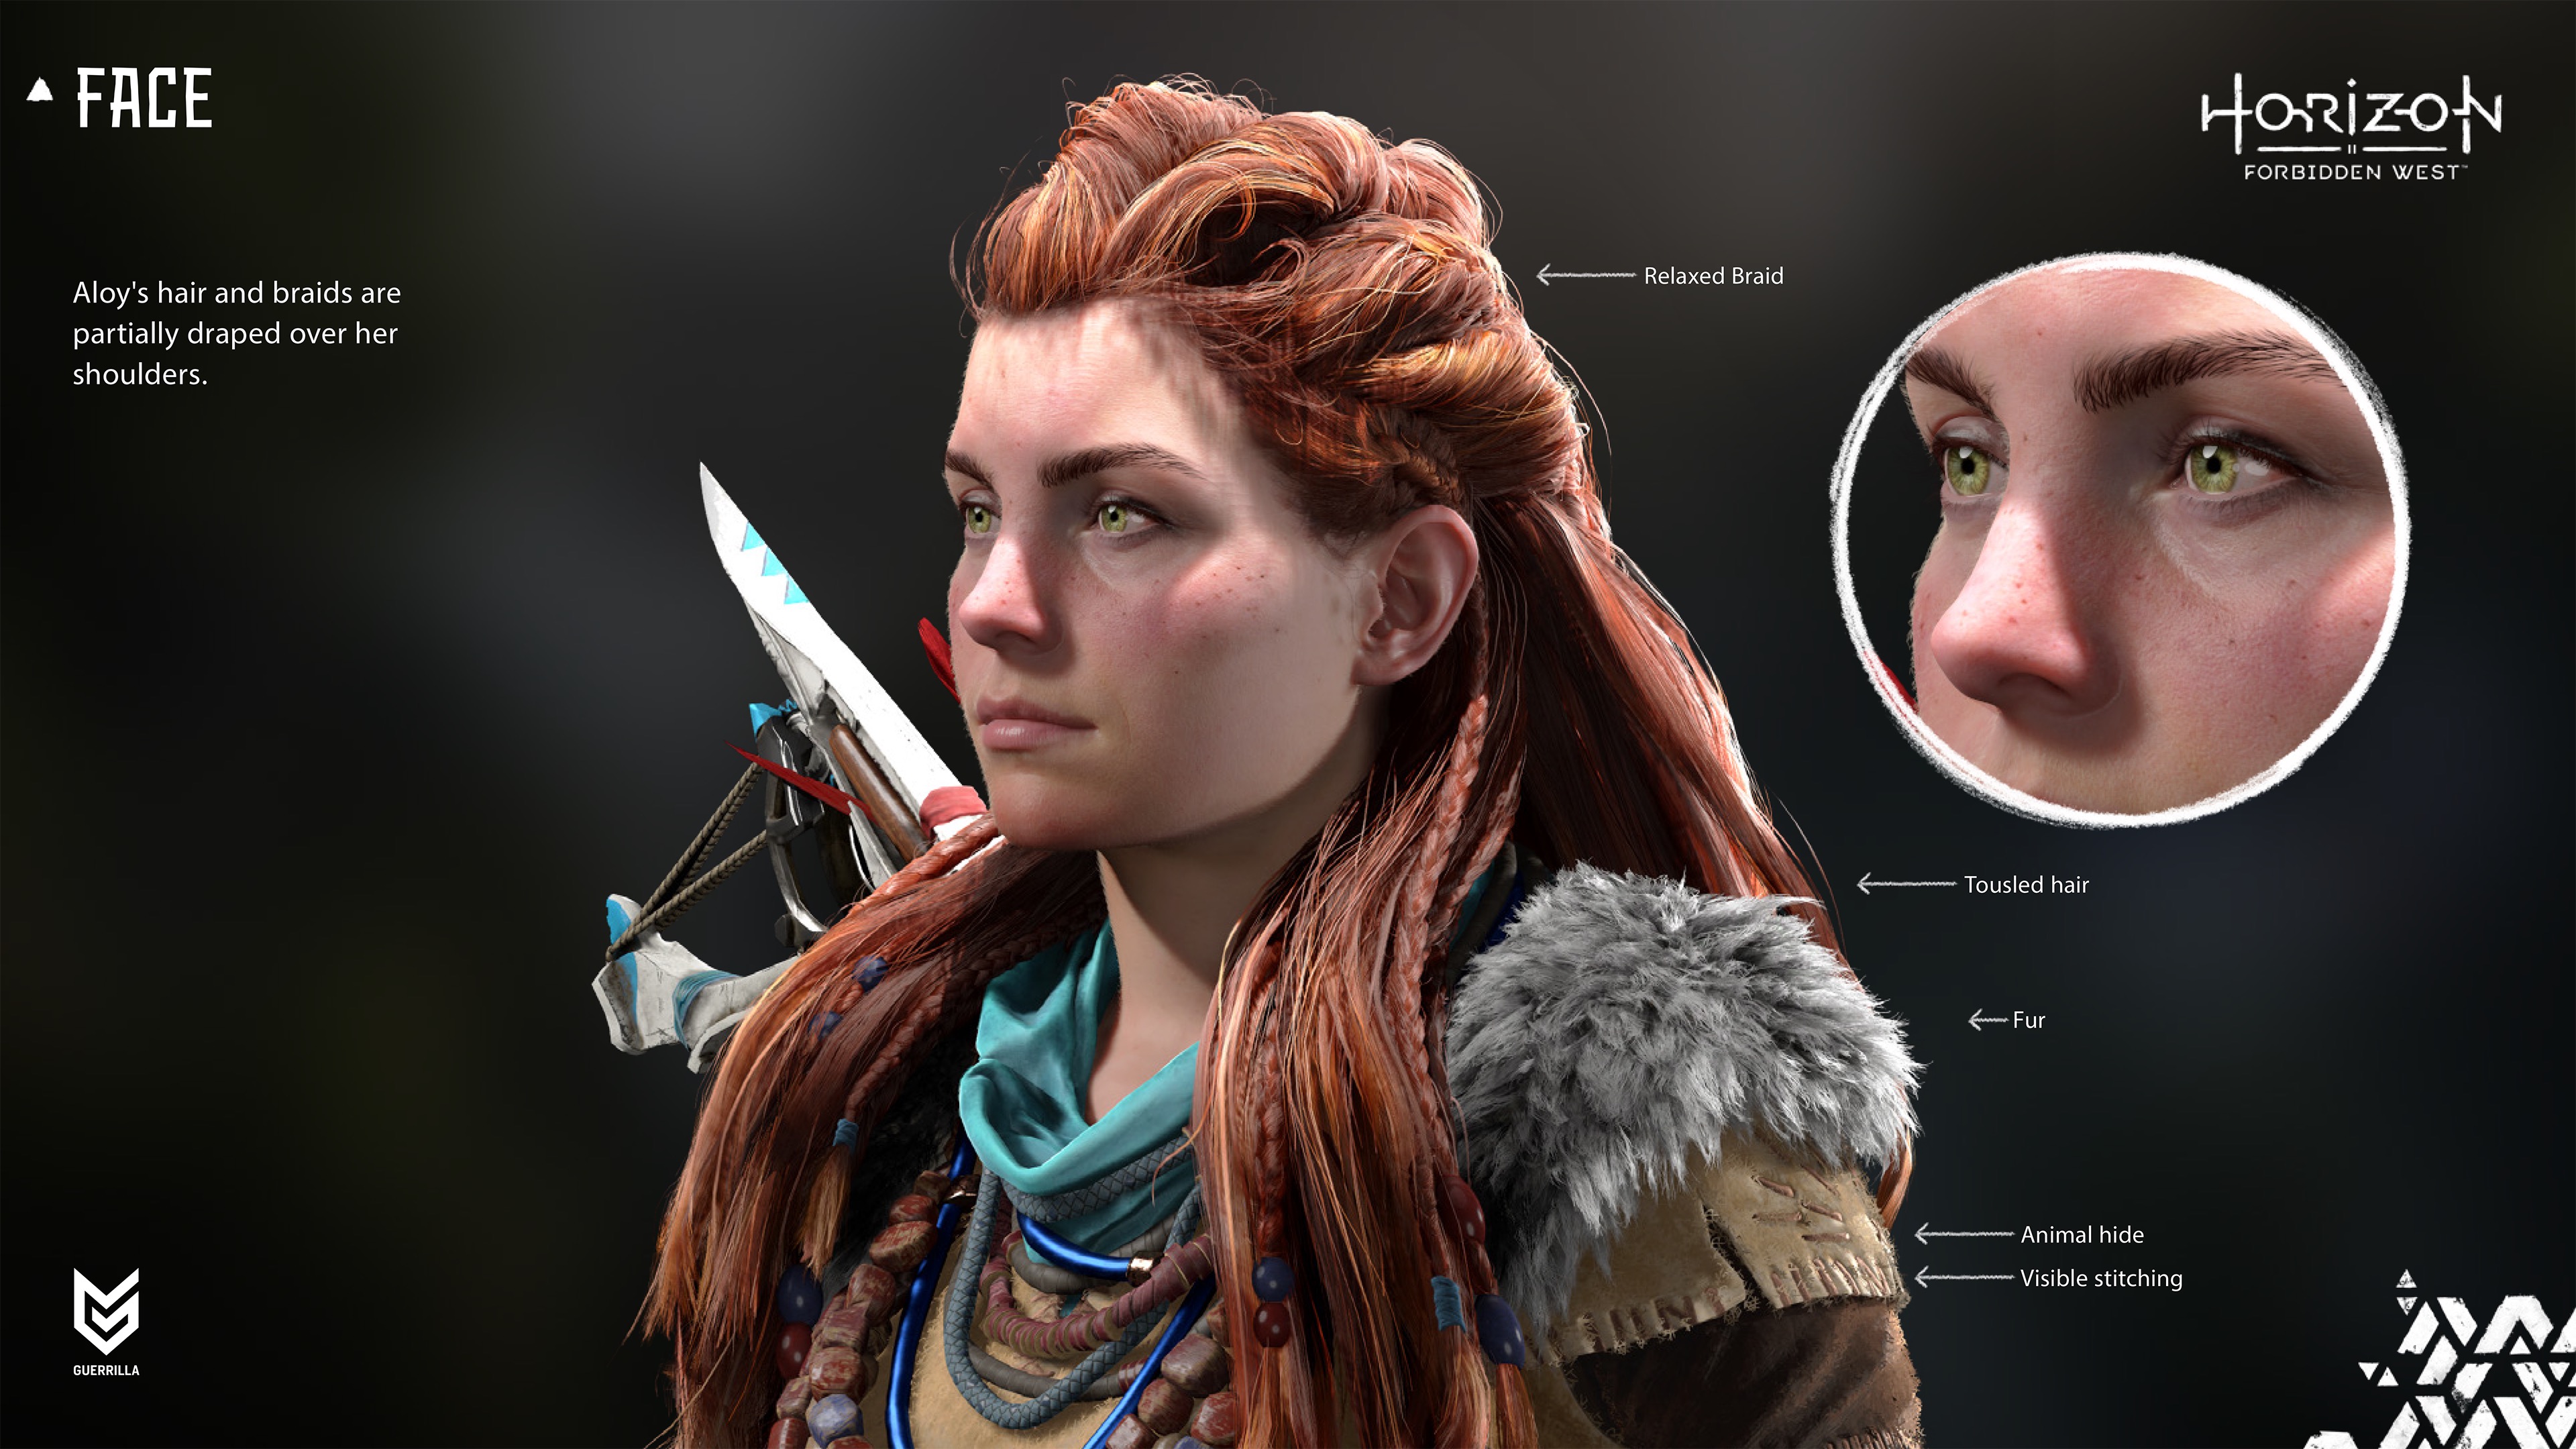 Horizon Forbidden West graphical showcase featuring protagonist Aloy